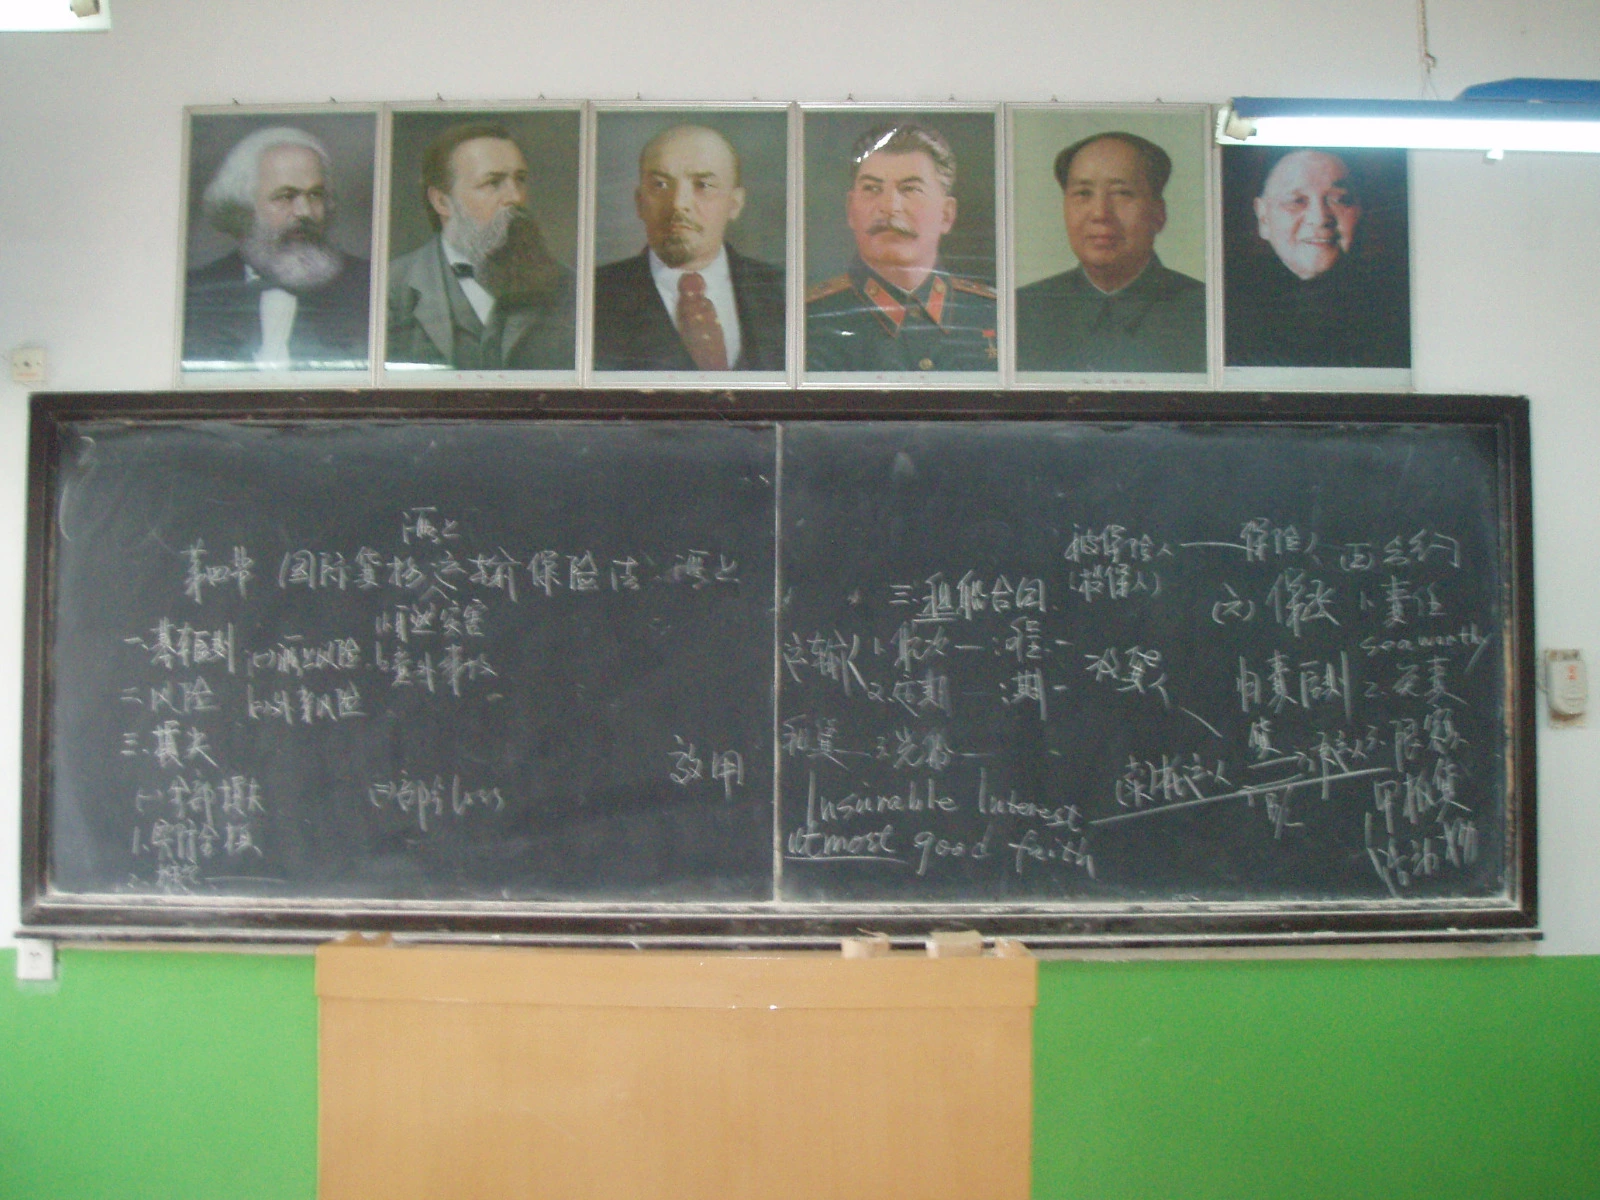 Keith Lamb's classroom in 2005 - note the unique progression of 'great teachers'